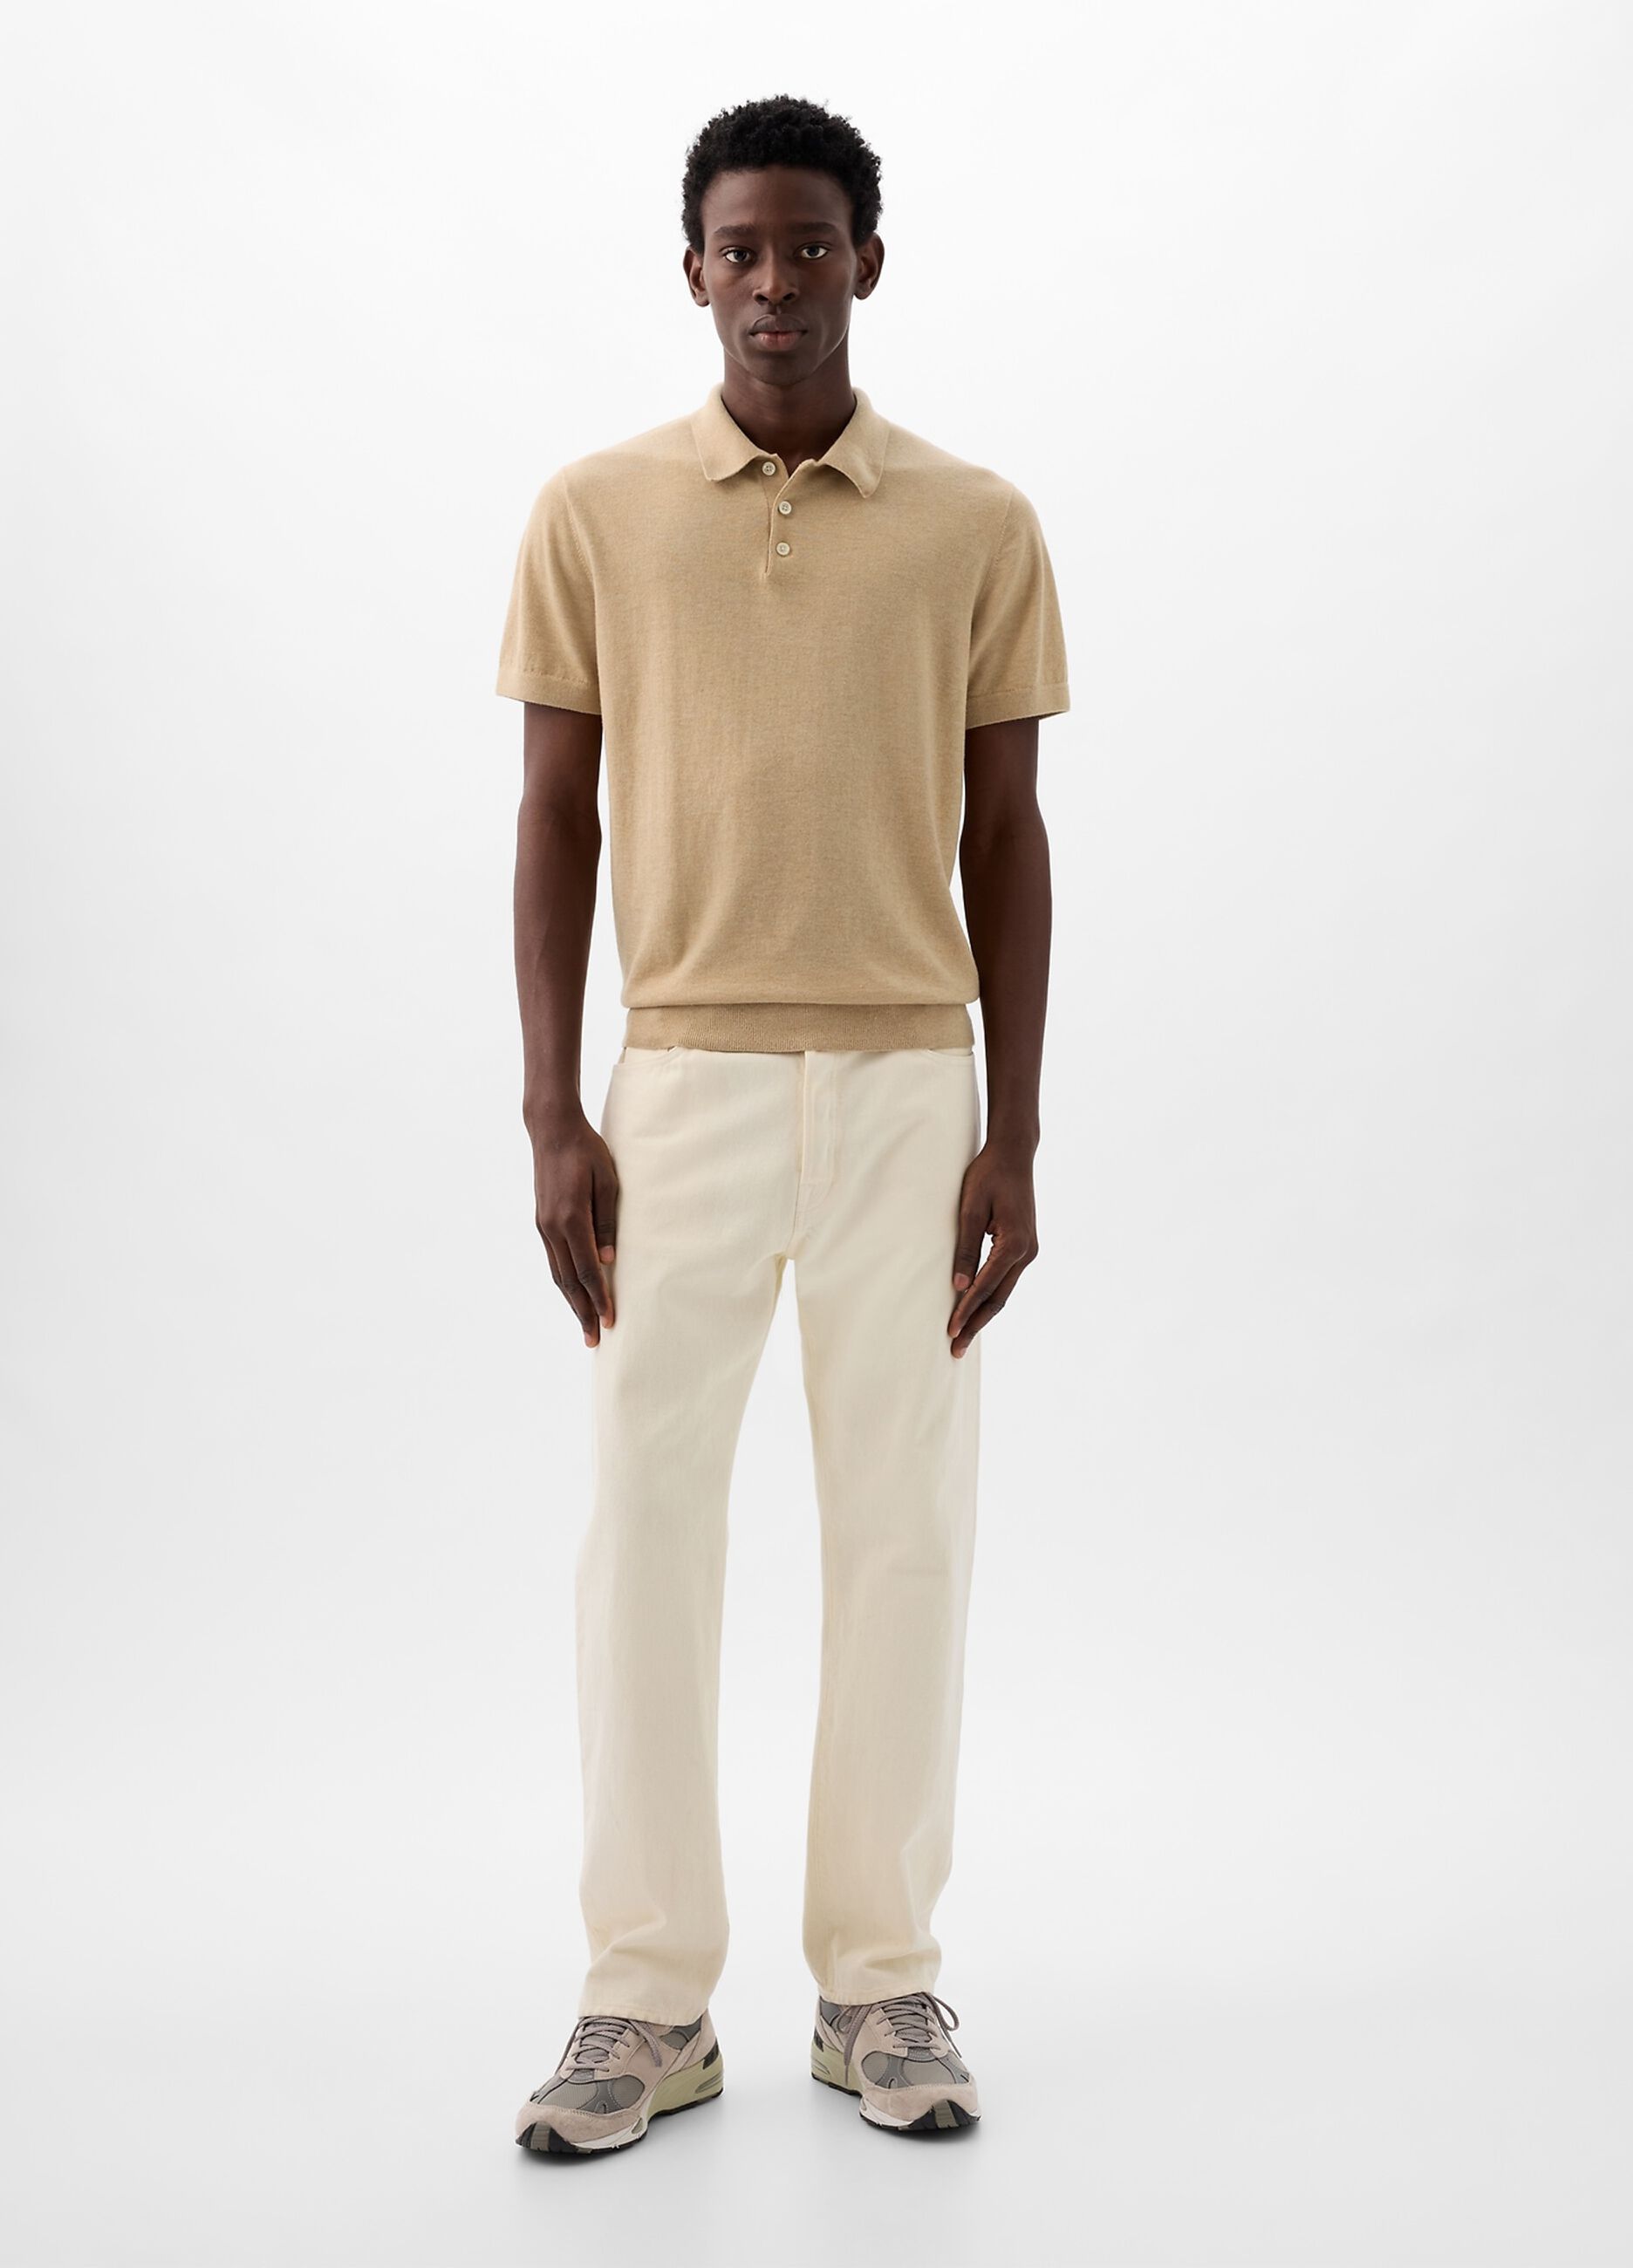 Polo shirt in cotton blend